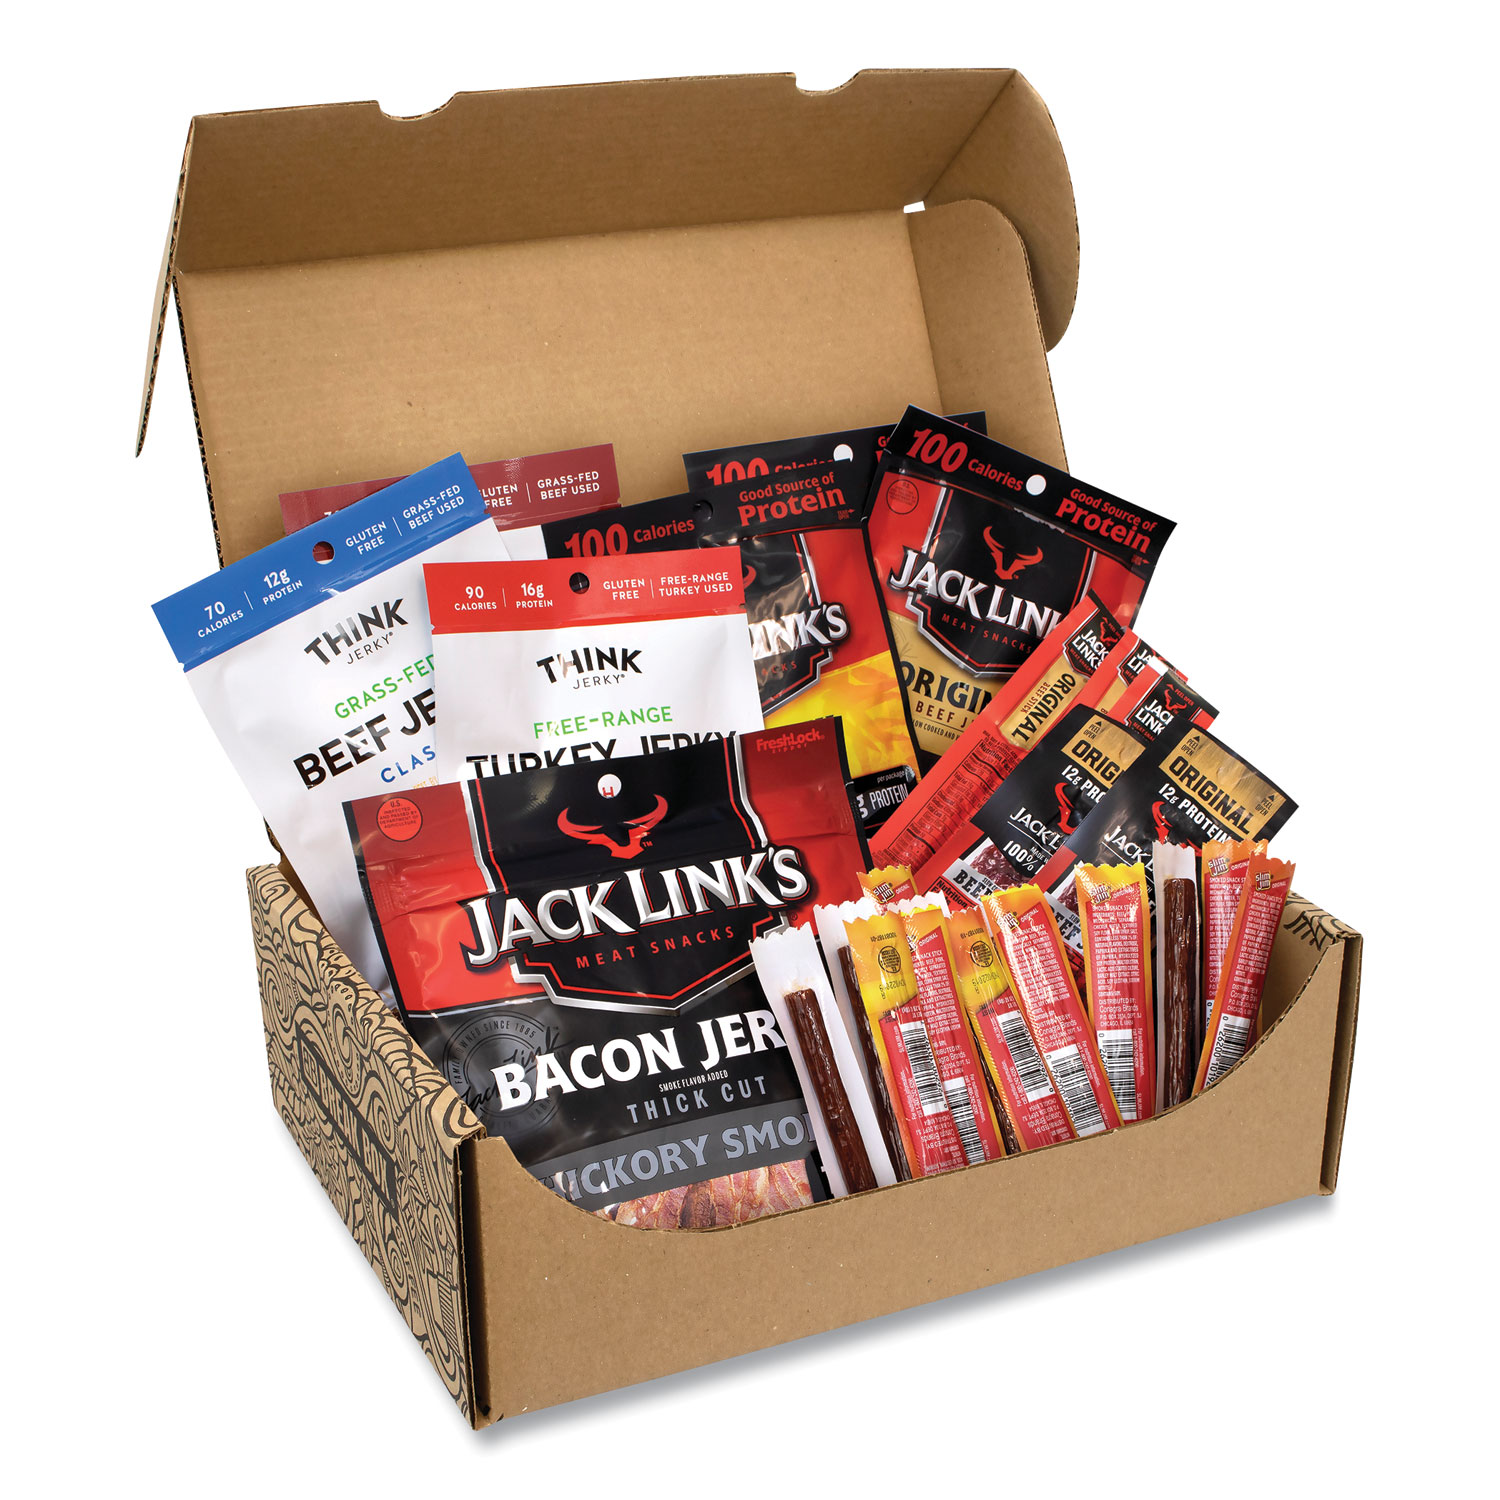  Snack Box Pros 70000020 Big Beef Jerky Box, 29 Assorted Snacks, Free Delivery in 1-4 Business Days (GRR700S0020) 